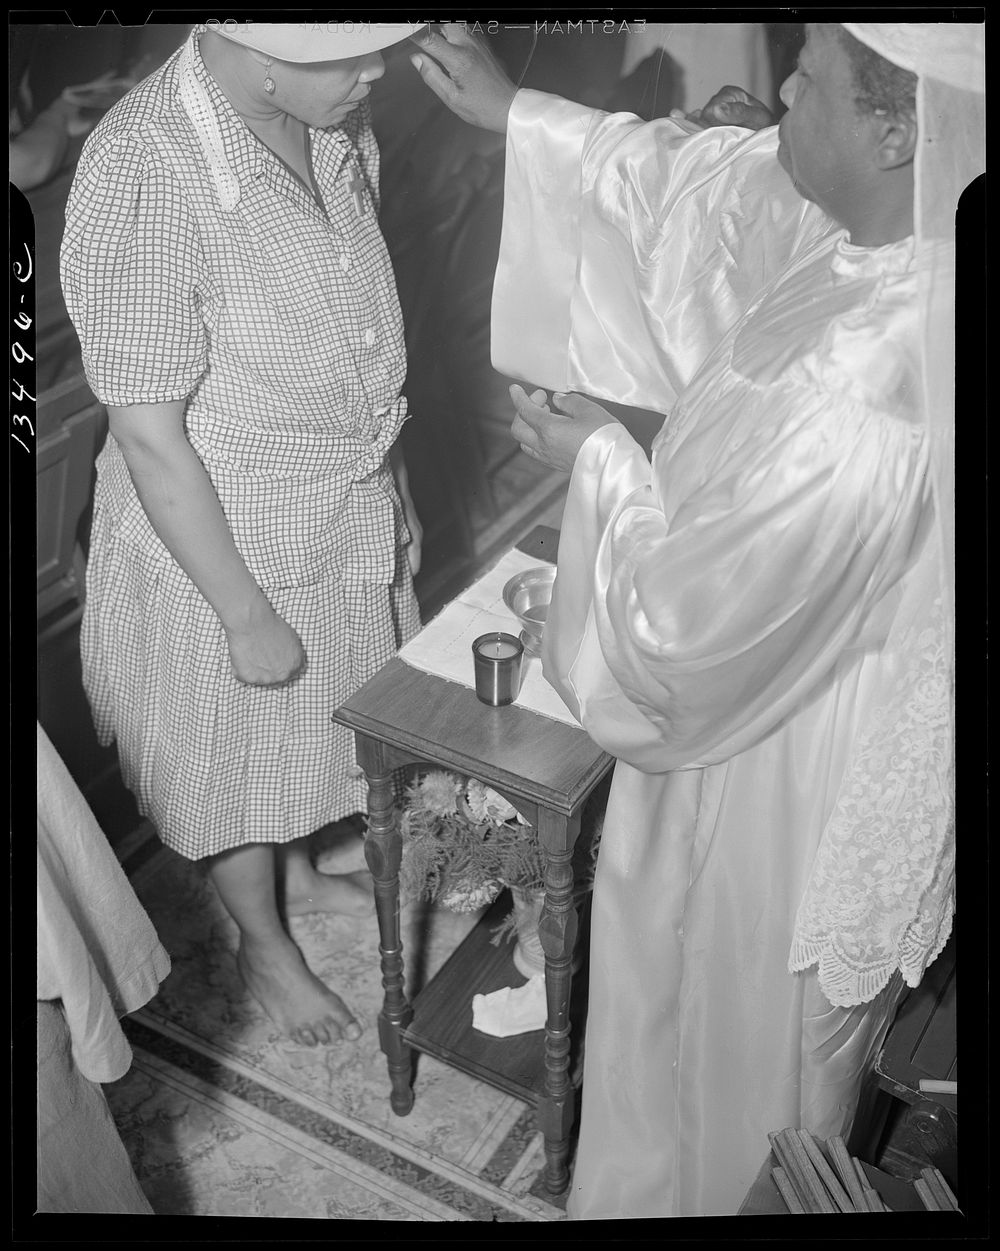 Washington, D.C. Reverend Clara Smith anointing a member of the St. Martin's Spiritual Church during the annual "flower bowl…